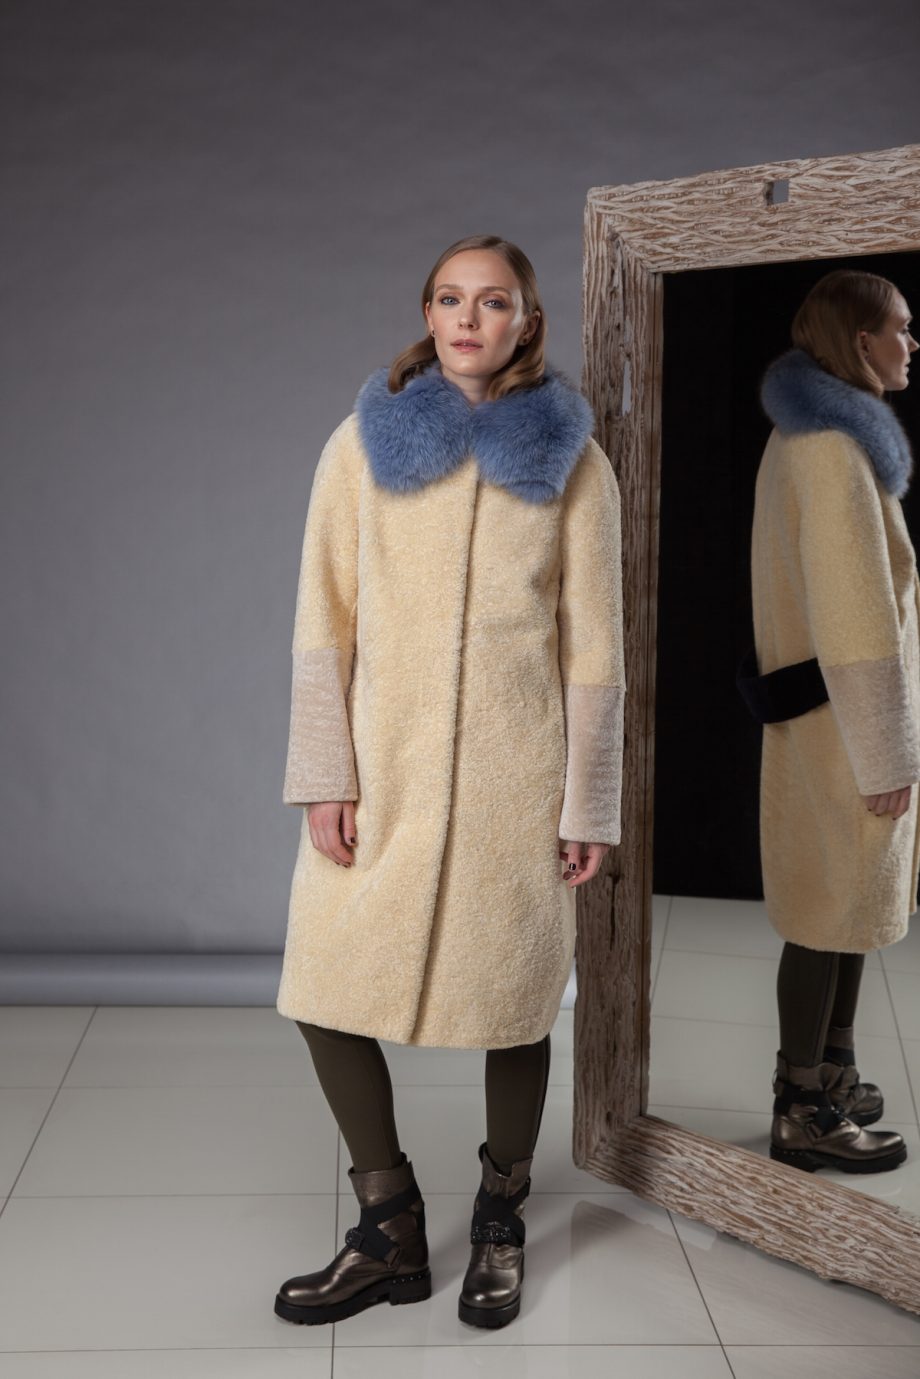 especially soft and light sheepskin coat decorated with fox fur made by Silta Mada fur studio in Vilnius.